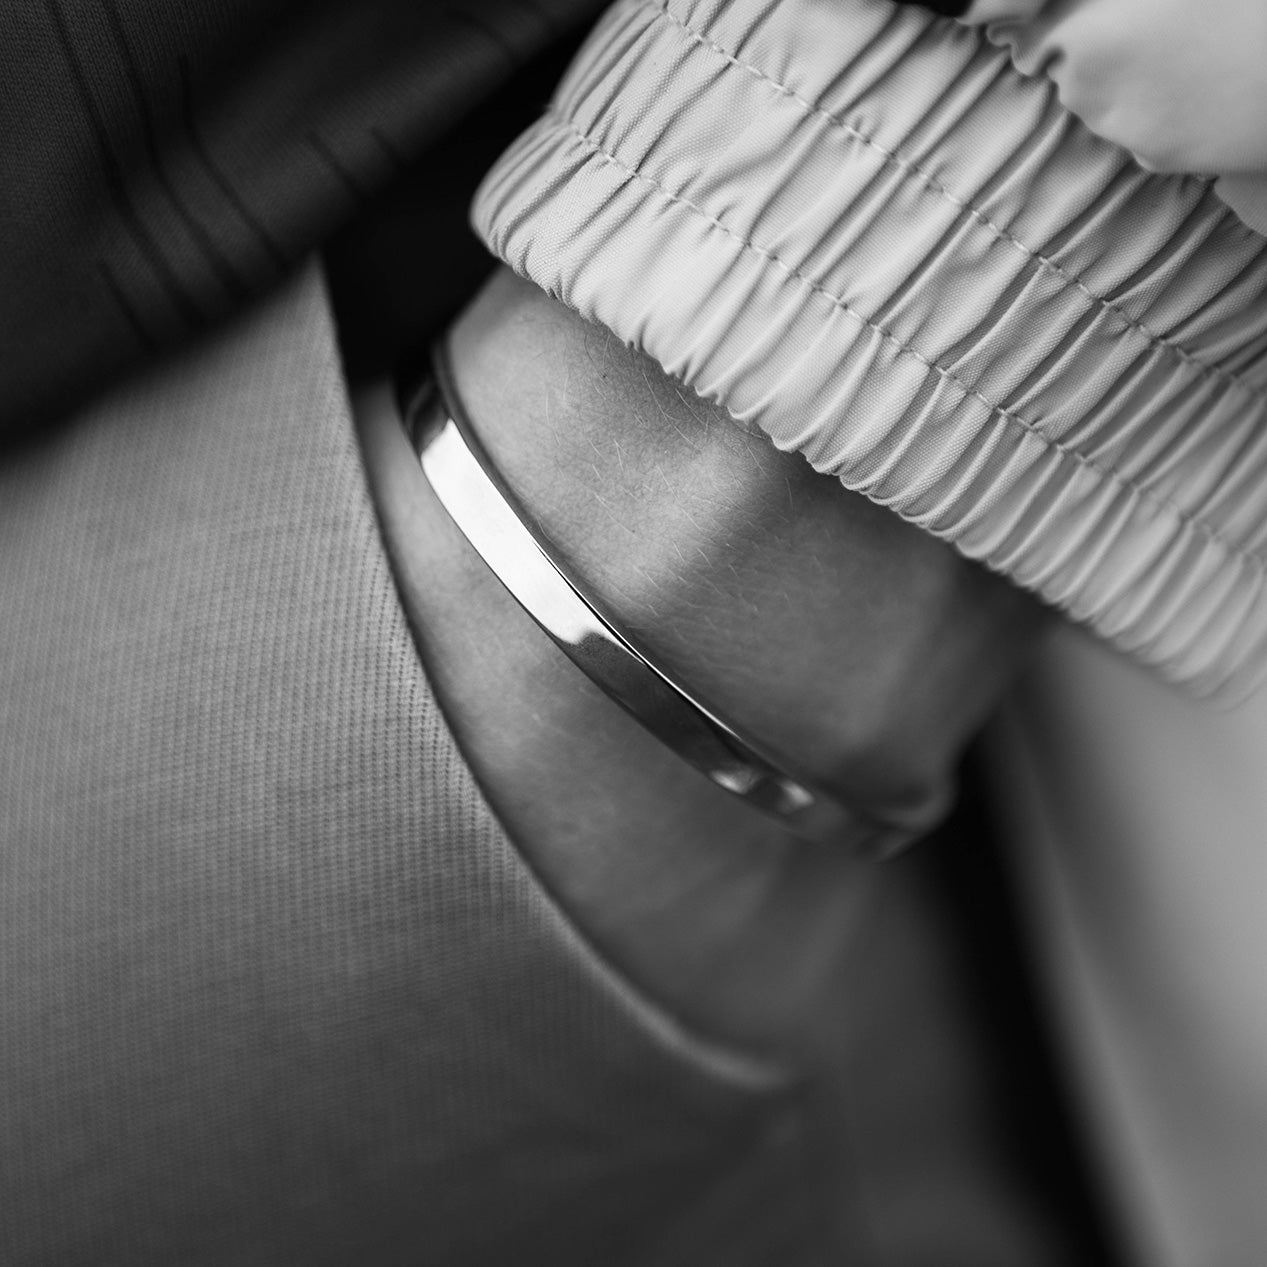 Closeup of a hand in a pocket wearing a titanium bracelet on the wrist.